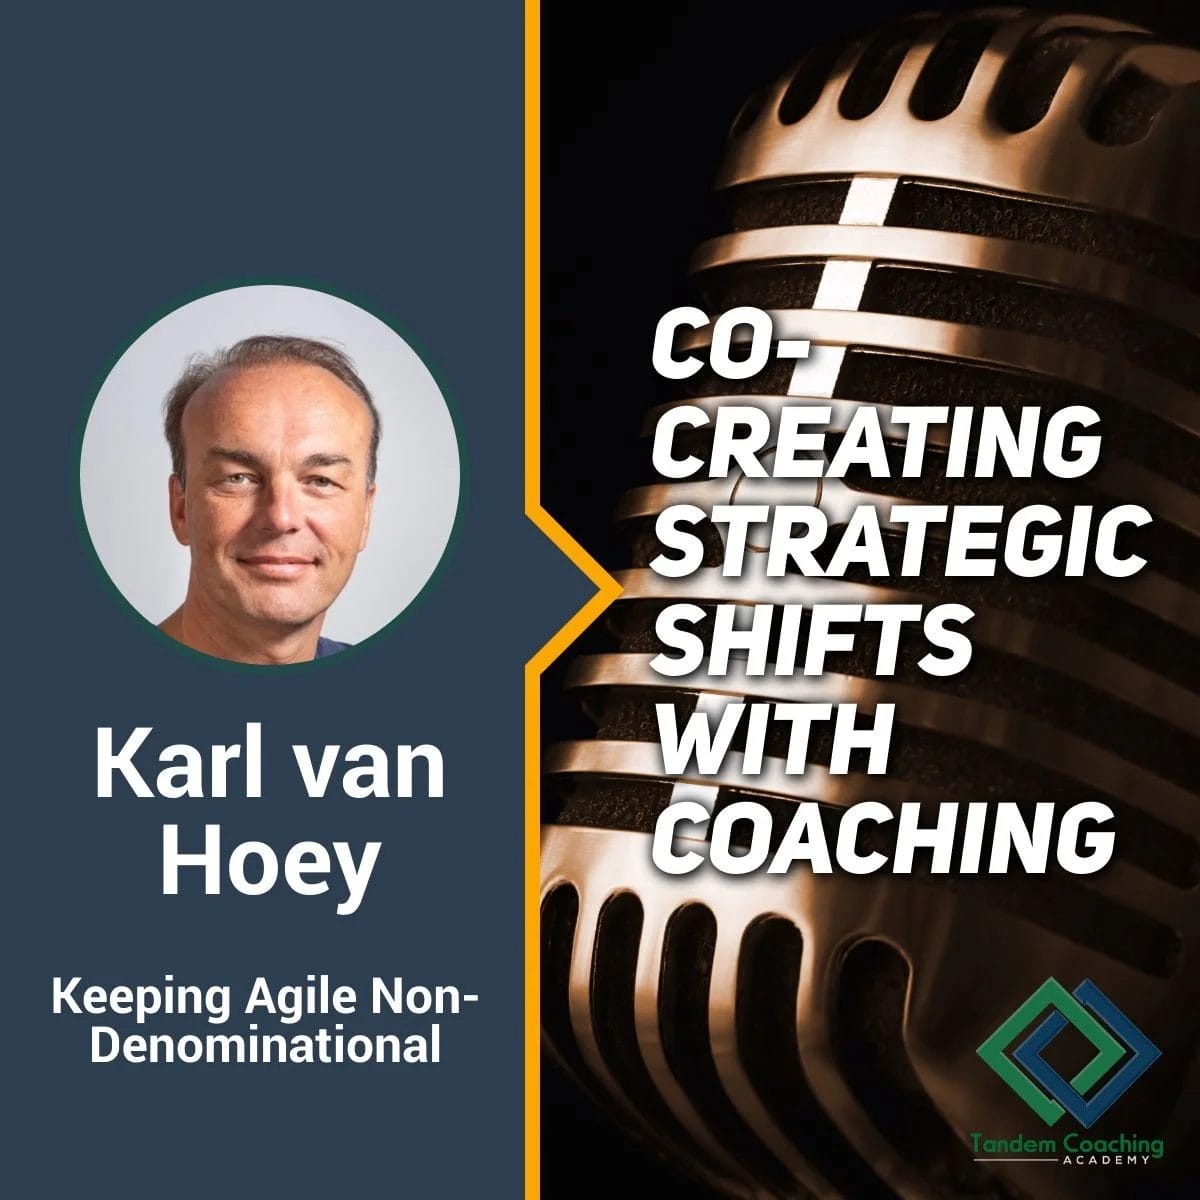 Co-creating Strategic Shifts with Coaching with Karl Van Hoey